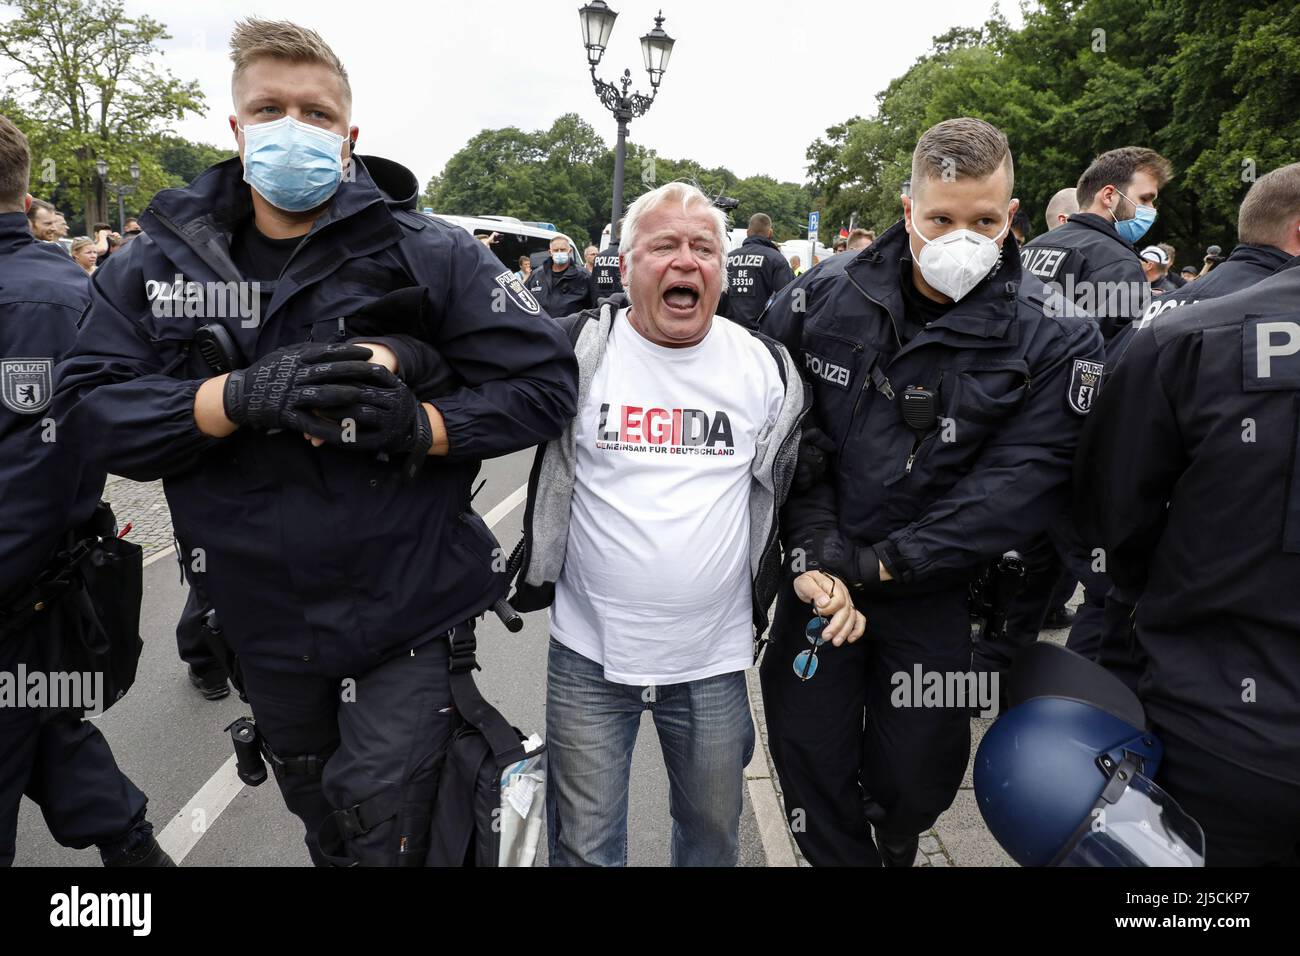 'A man wearing a Legida shirt is arrested by police during an extreme right-wing Anti Corona Beschraenkungs Demo. The demonstration of the right-wing extremists was registered under the motto ''Homeland and world peace''. [automated translation]' Stock Photo